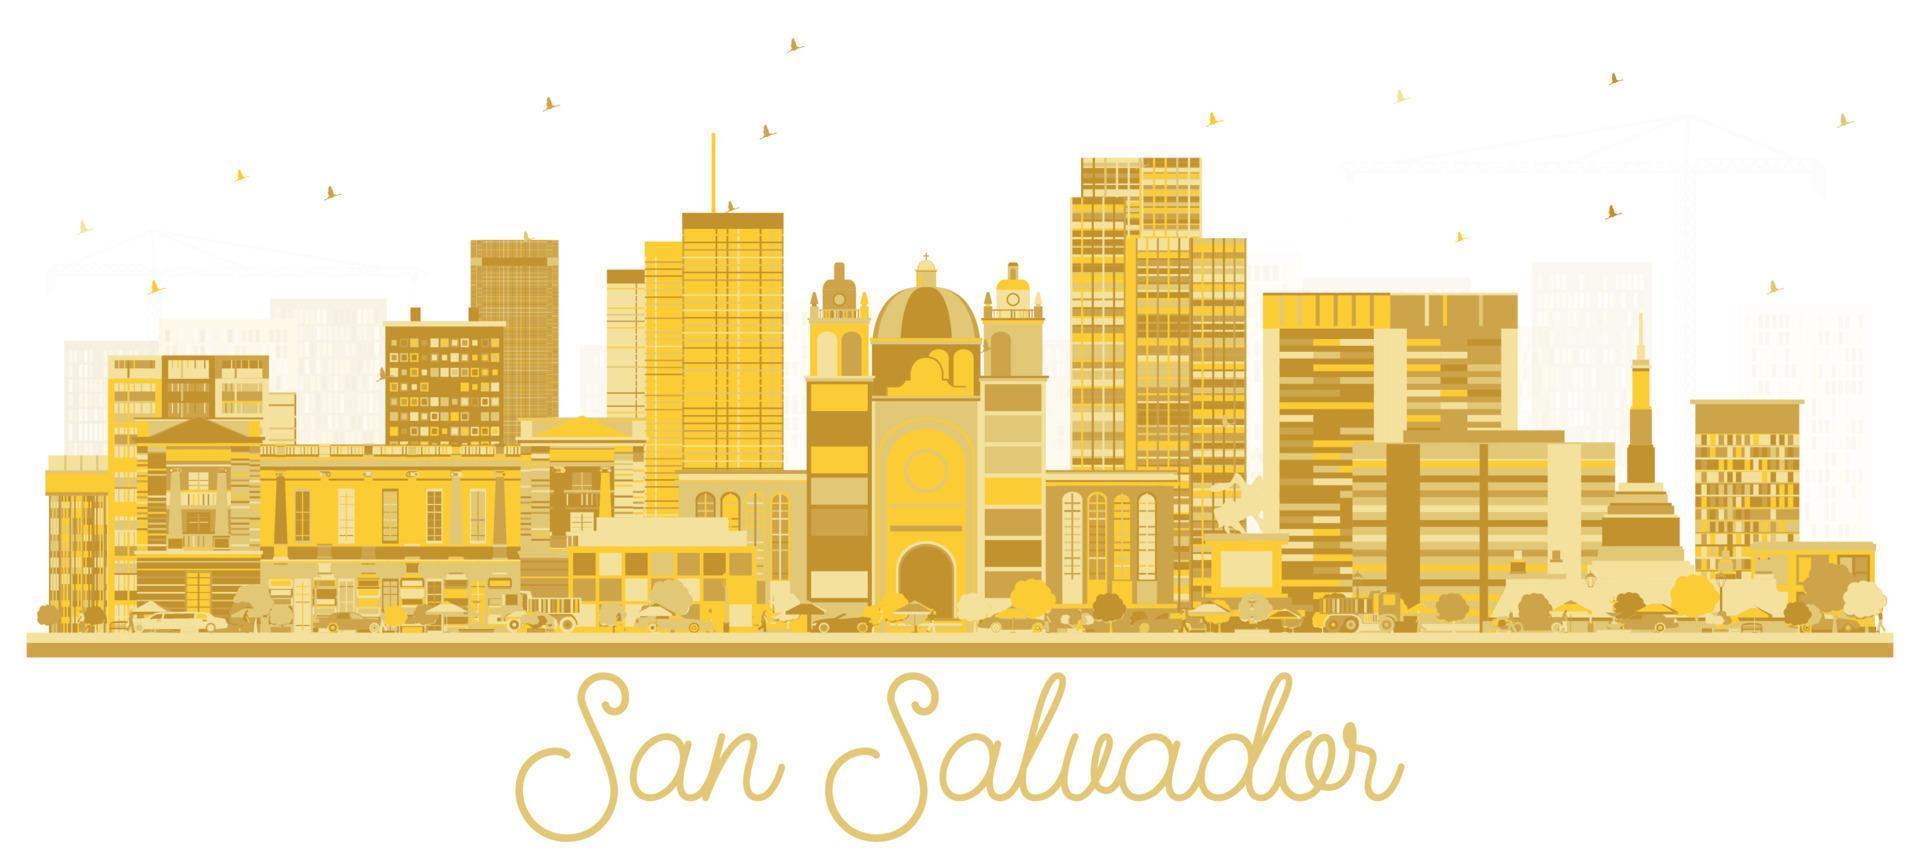 San Salvador City Skyline Silhouette with Golden Buildings Isolated on White. vector